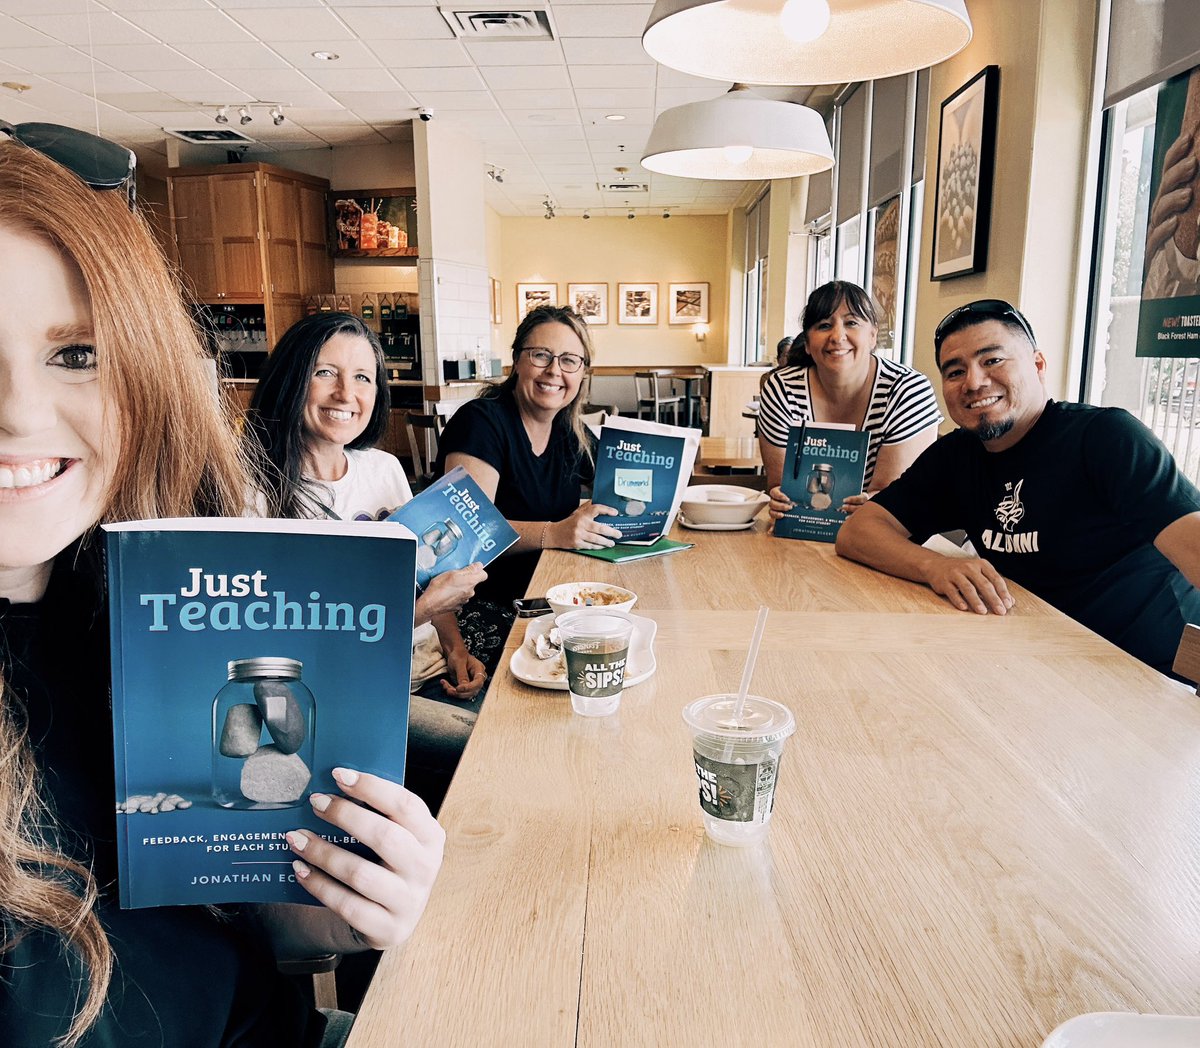 Apparently I’m terrible at taking pictures but at least the conversations were good! Finished up @eckertjon ‘s “Just Teaching” on Tuesday. We all truly enjoyed this book and highly recommend it! #robinsonisd